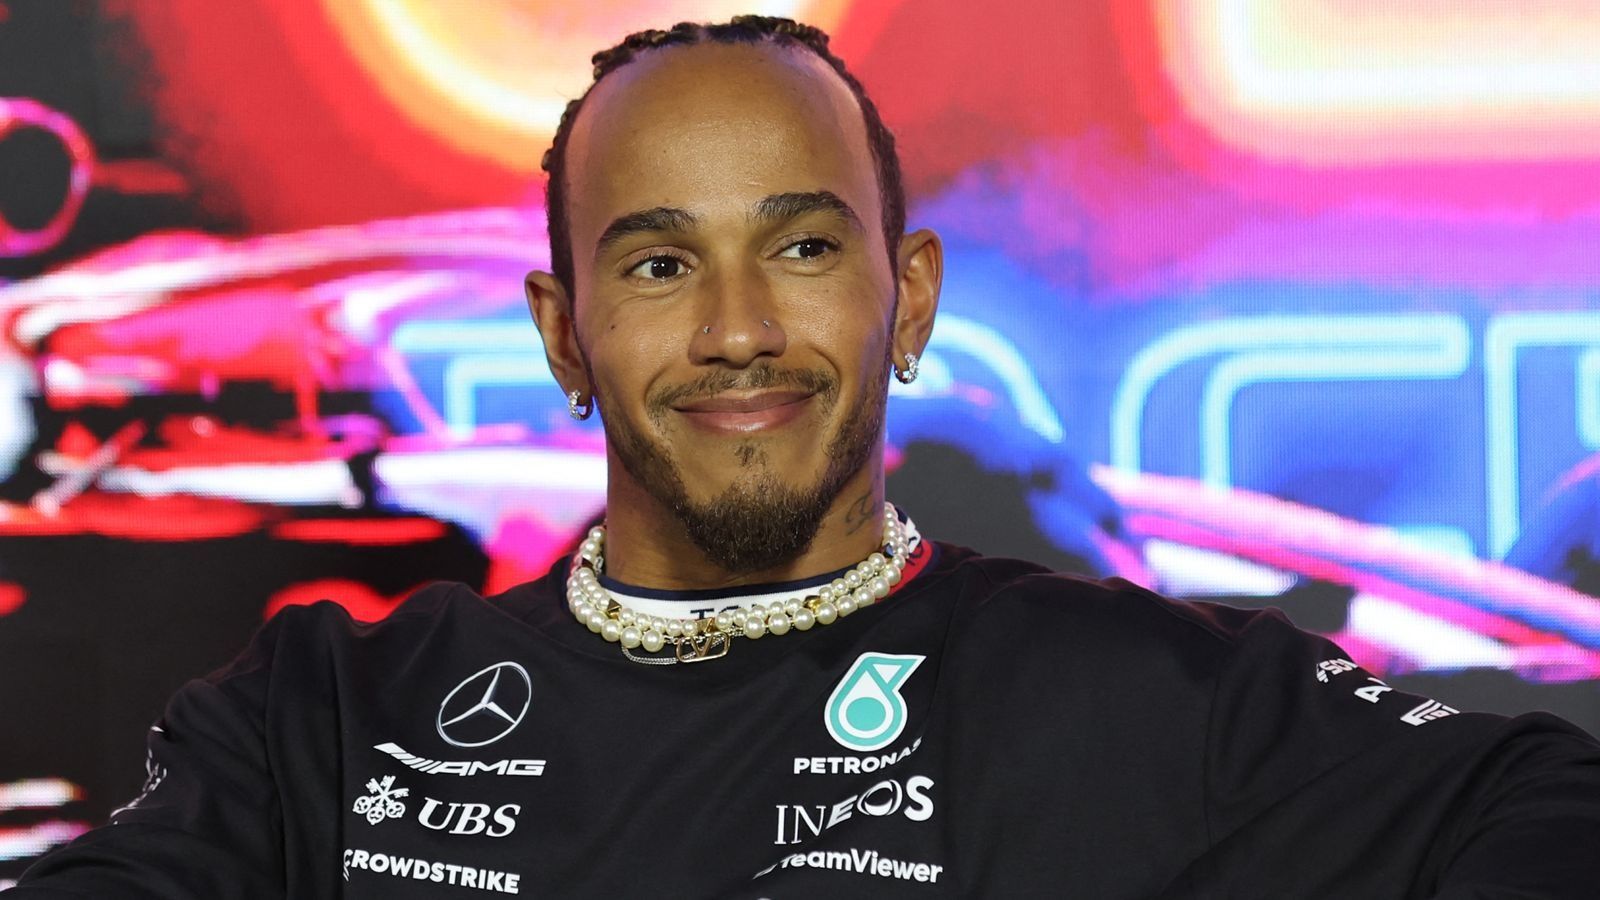 Hamilton Comments On His Decision To Sign Contract With Ferrari